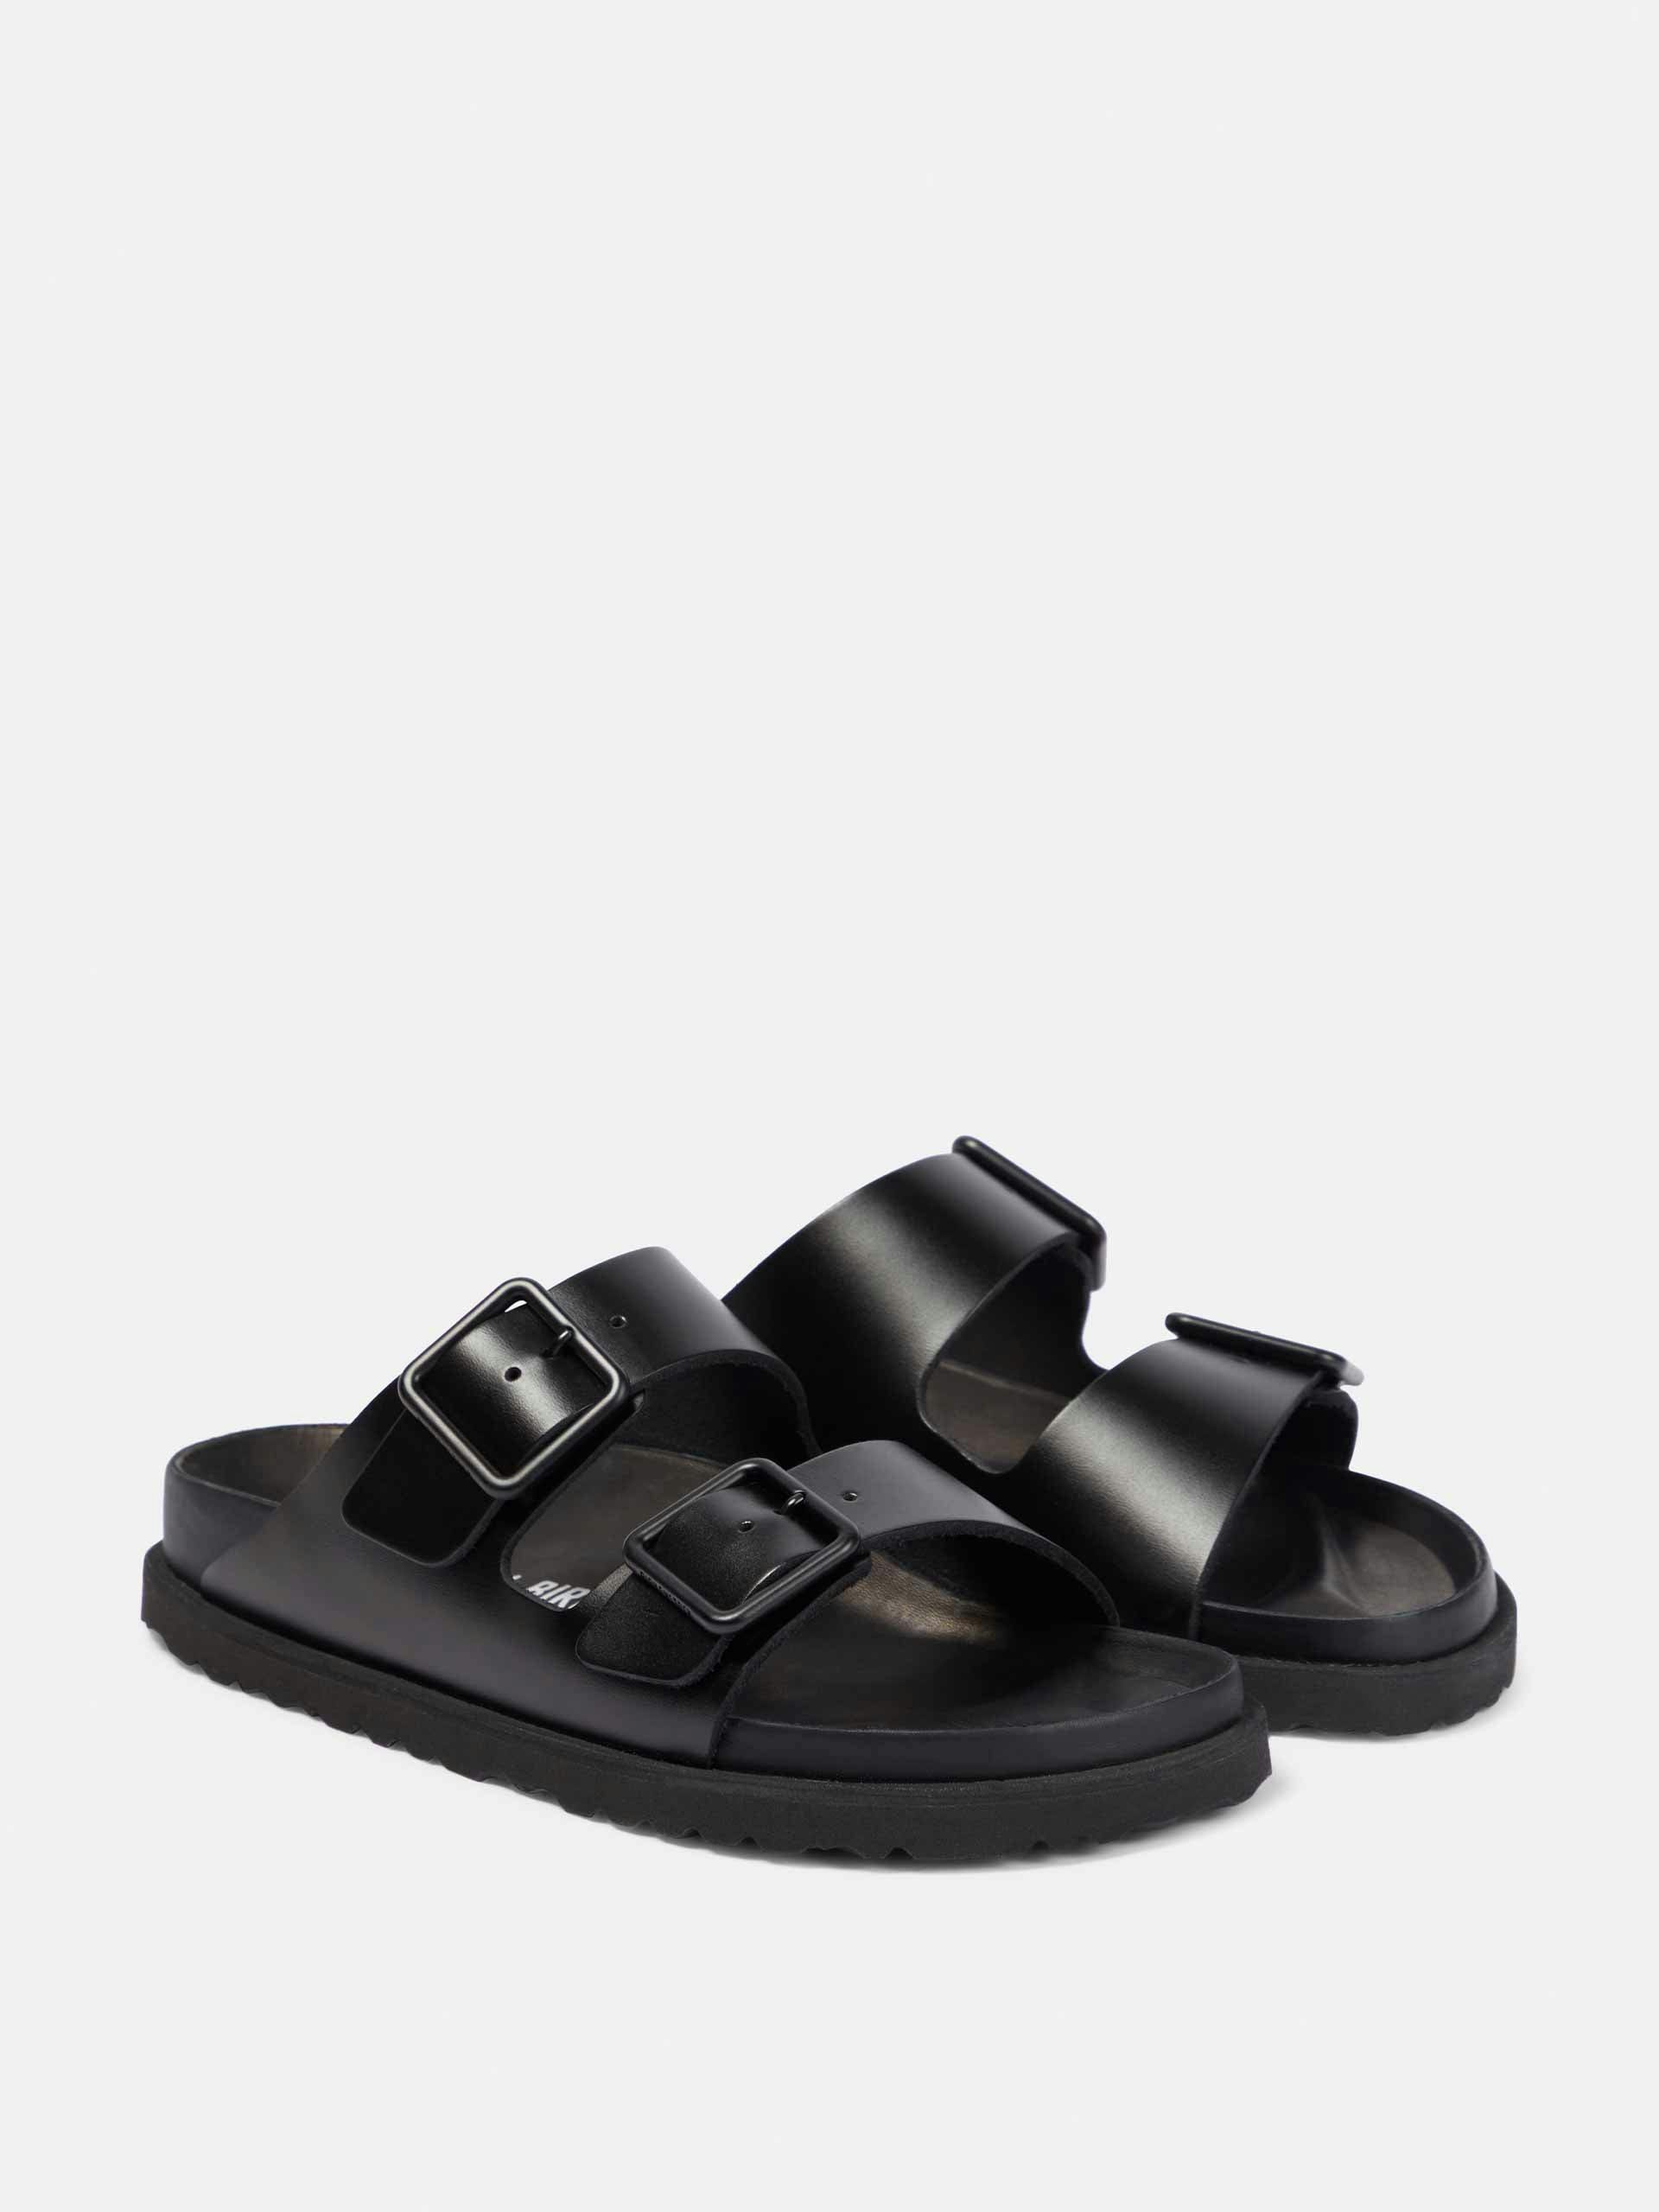 Black buckle leather sandals